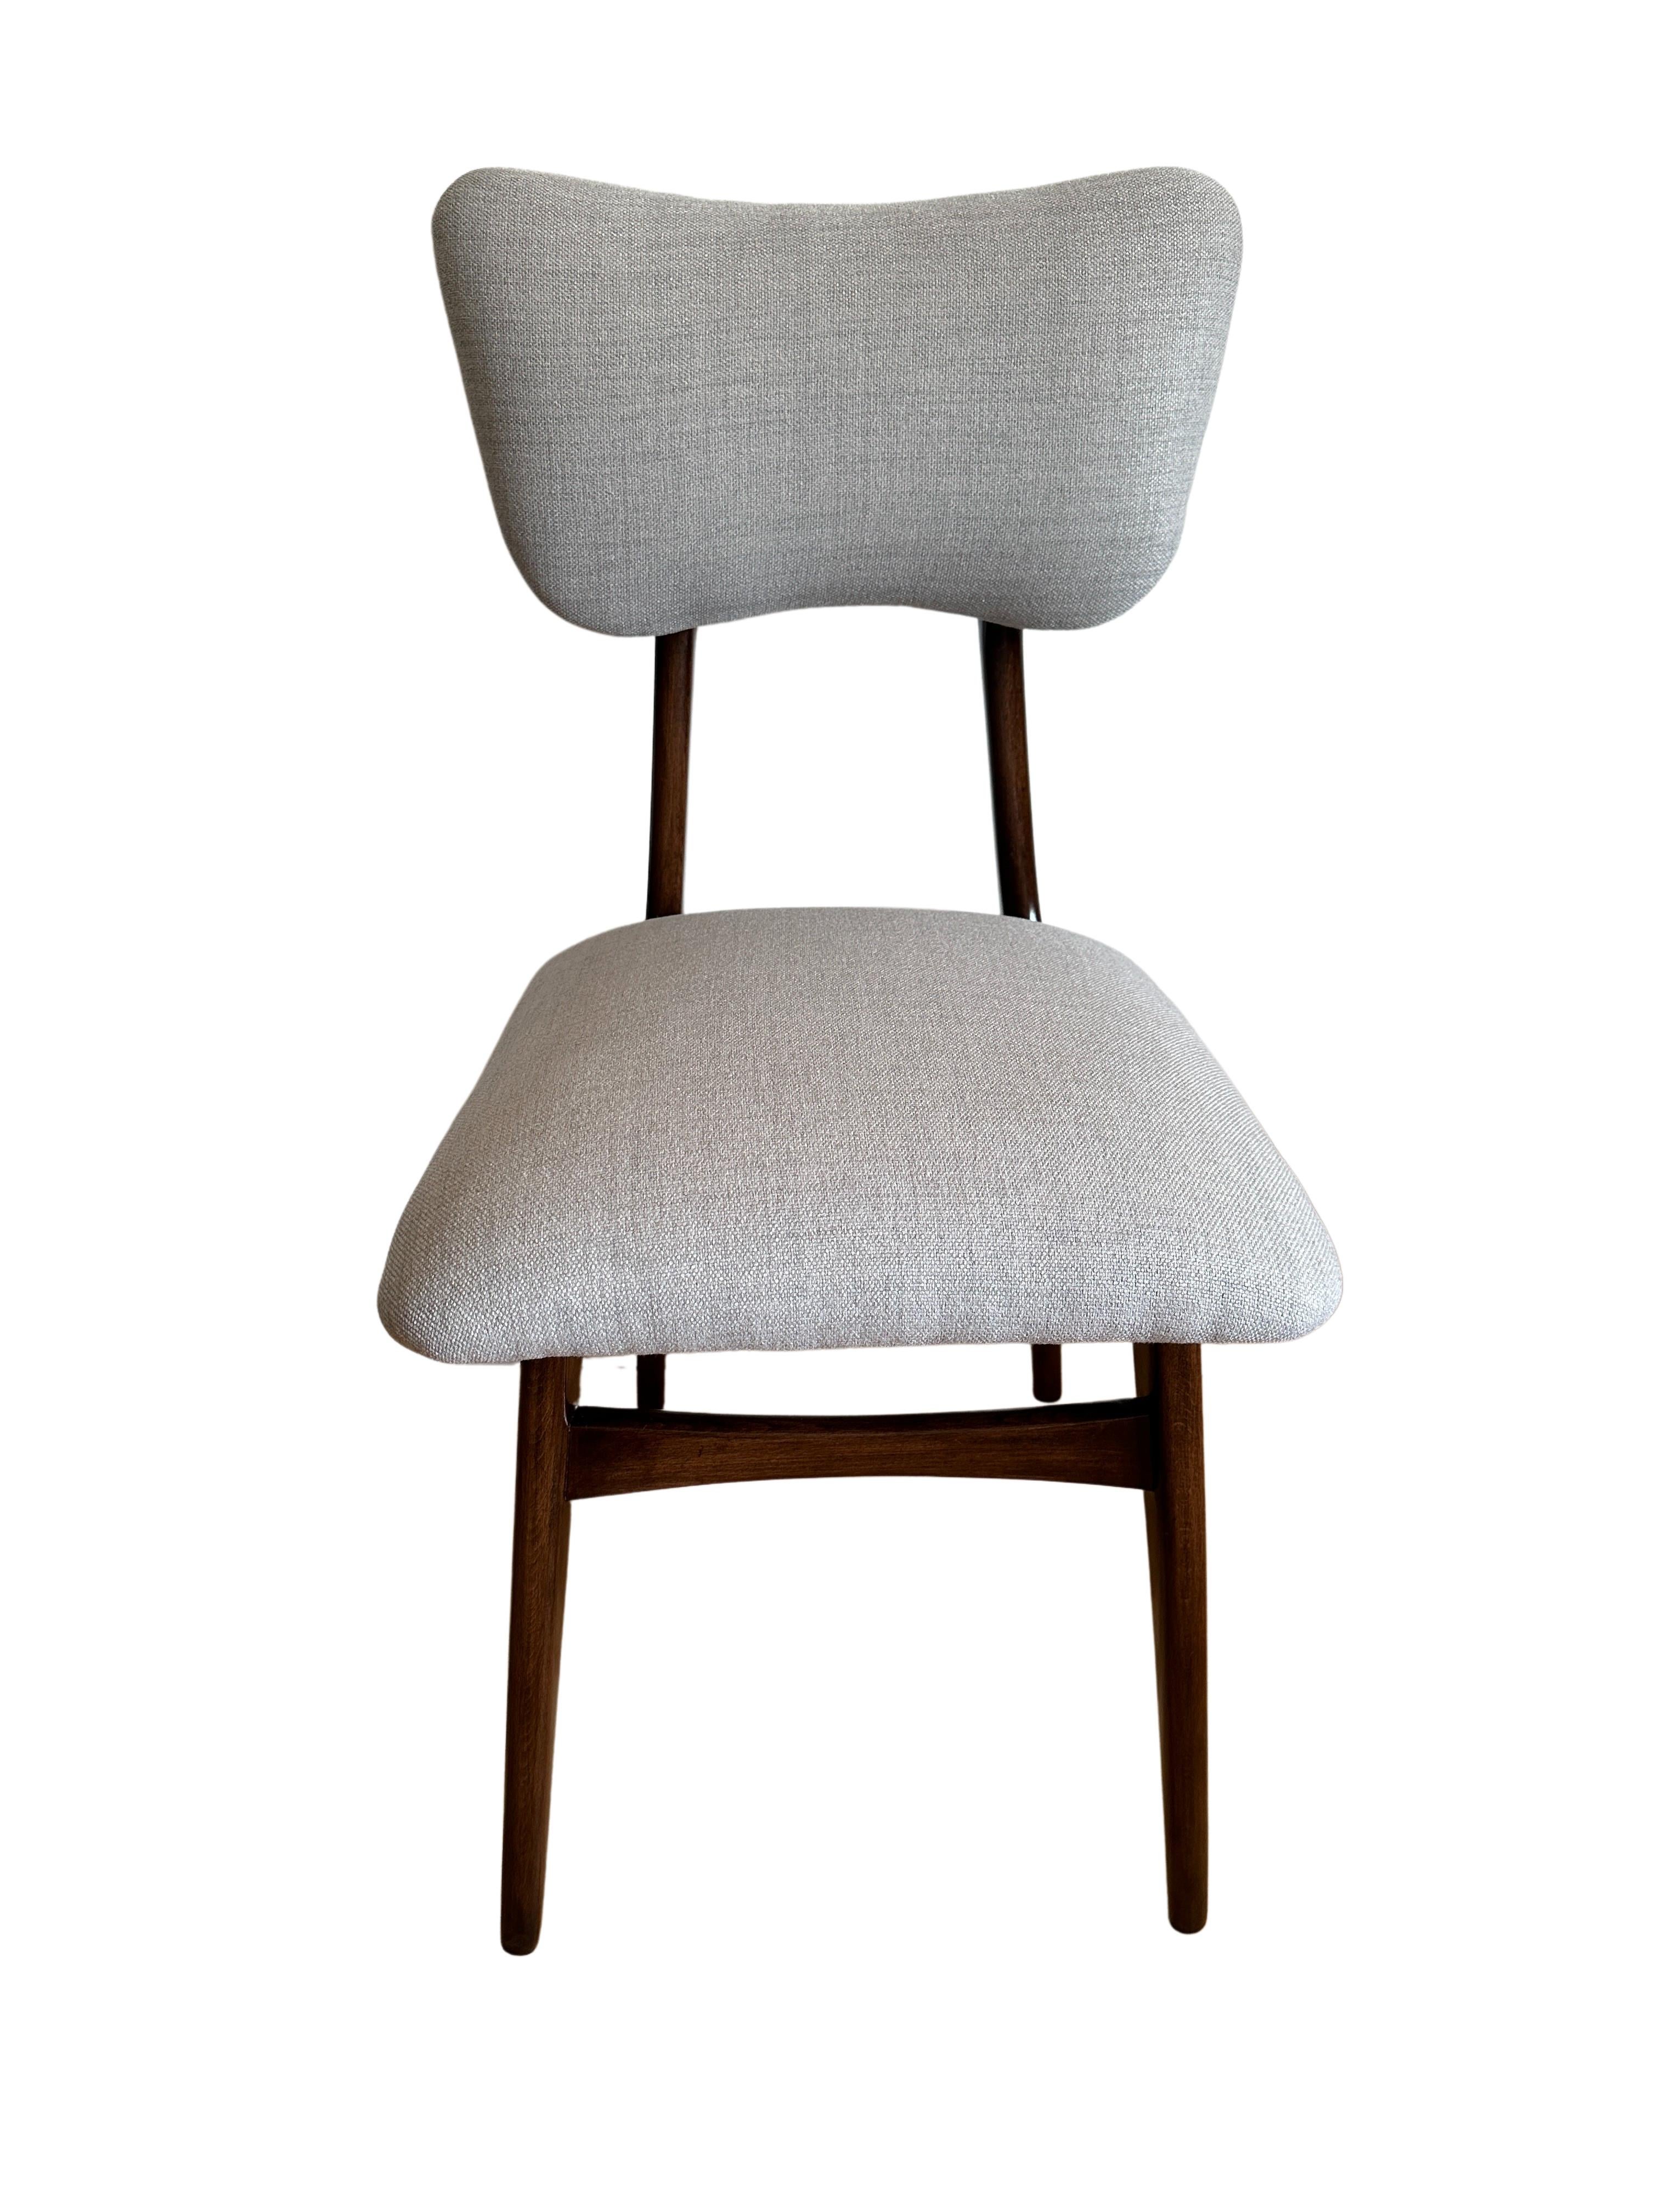 Set of 6 Midcentury Grey Dining Chairs, Europe, 1960s For Sale 6